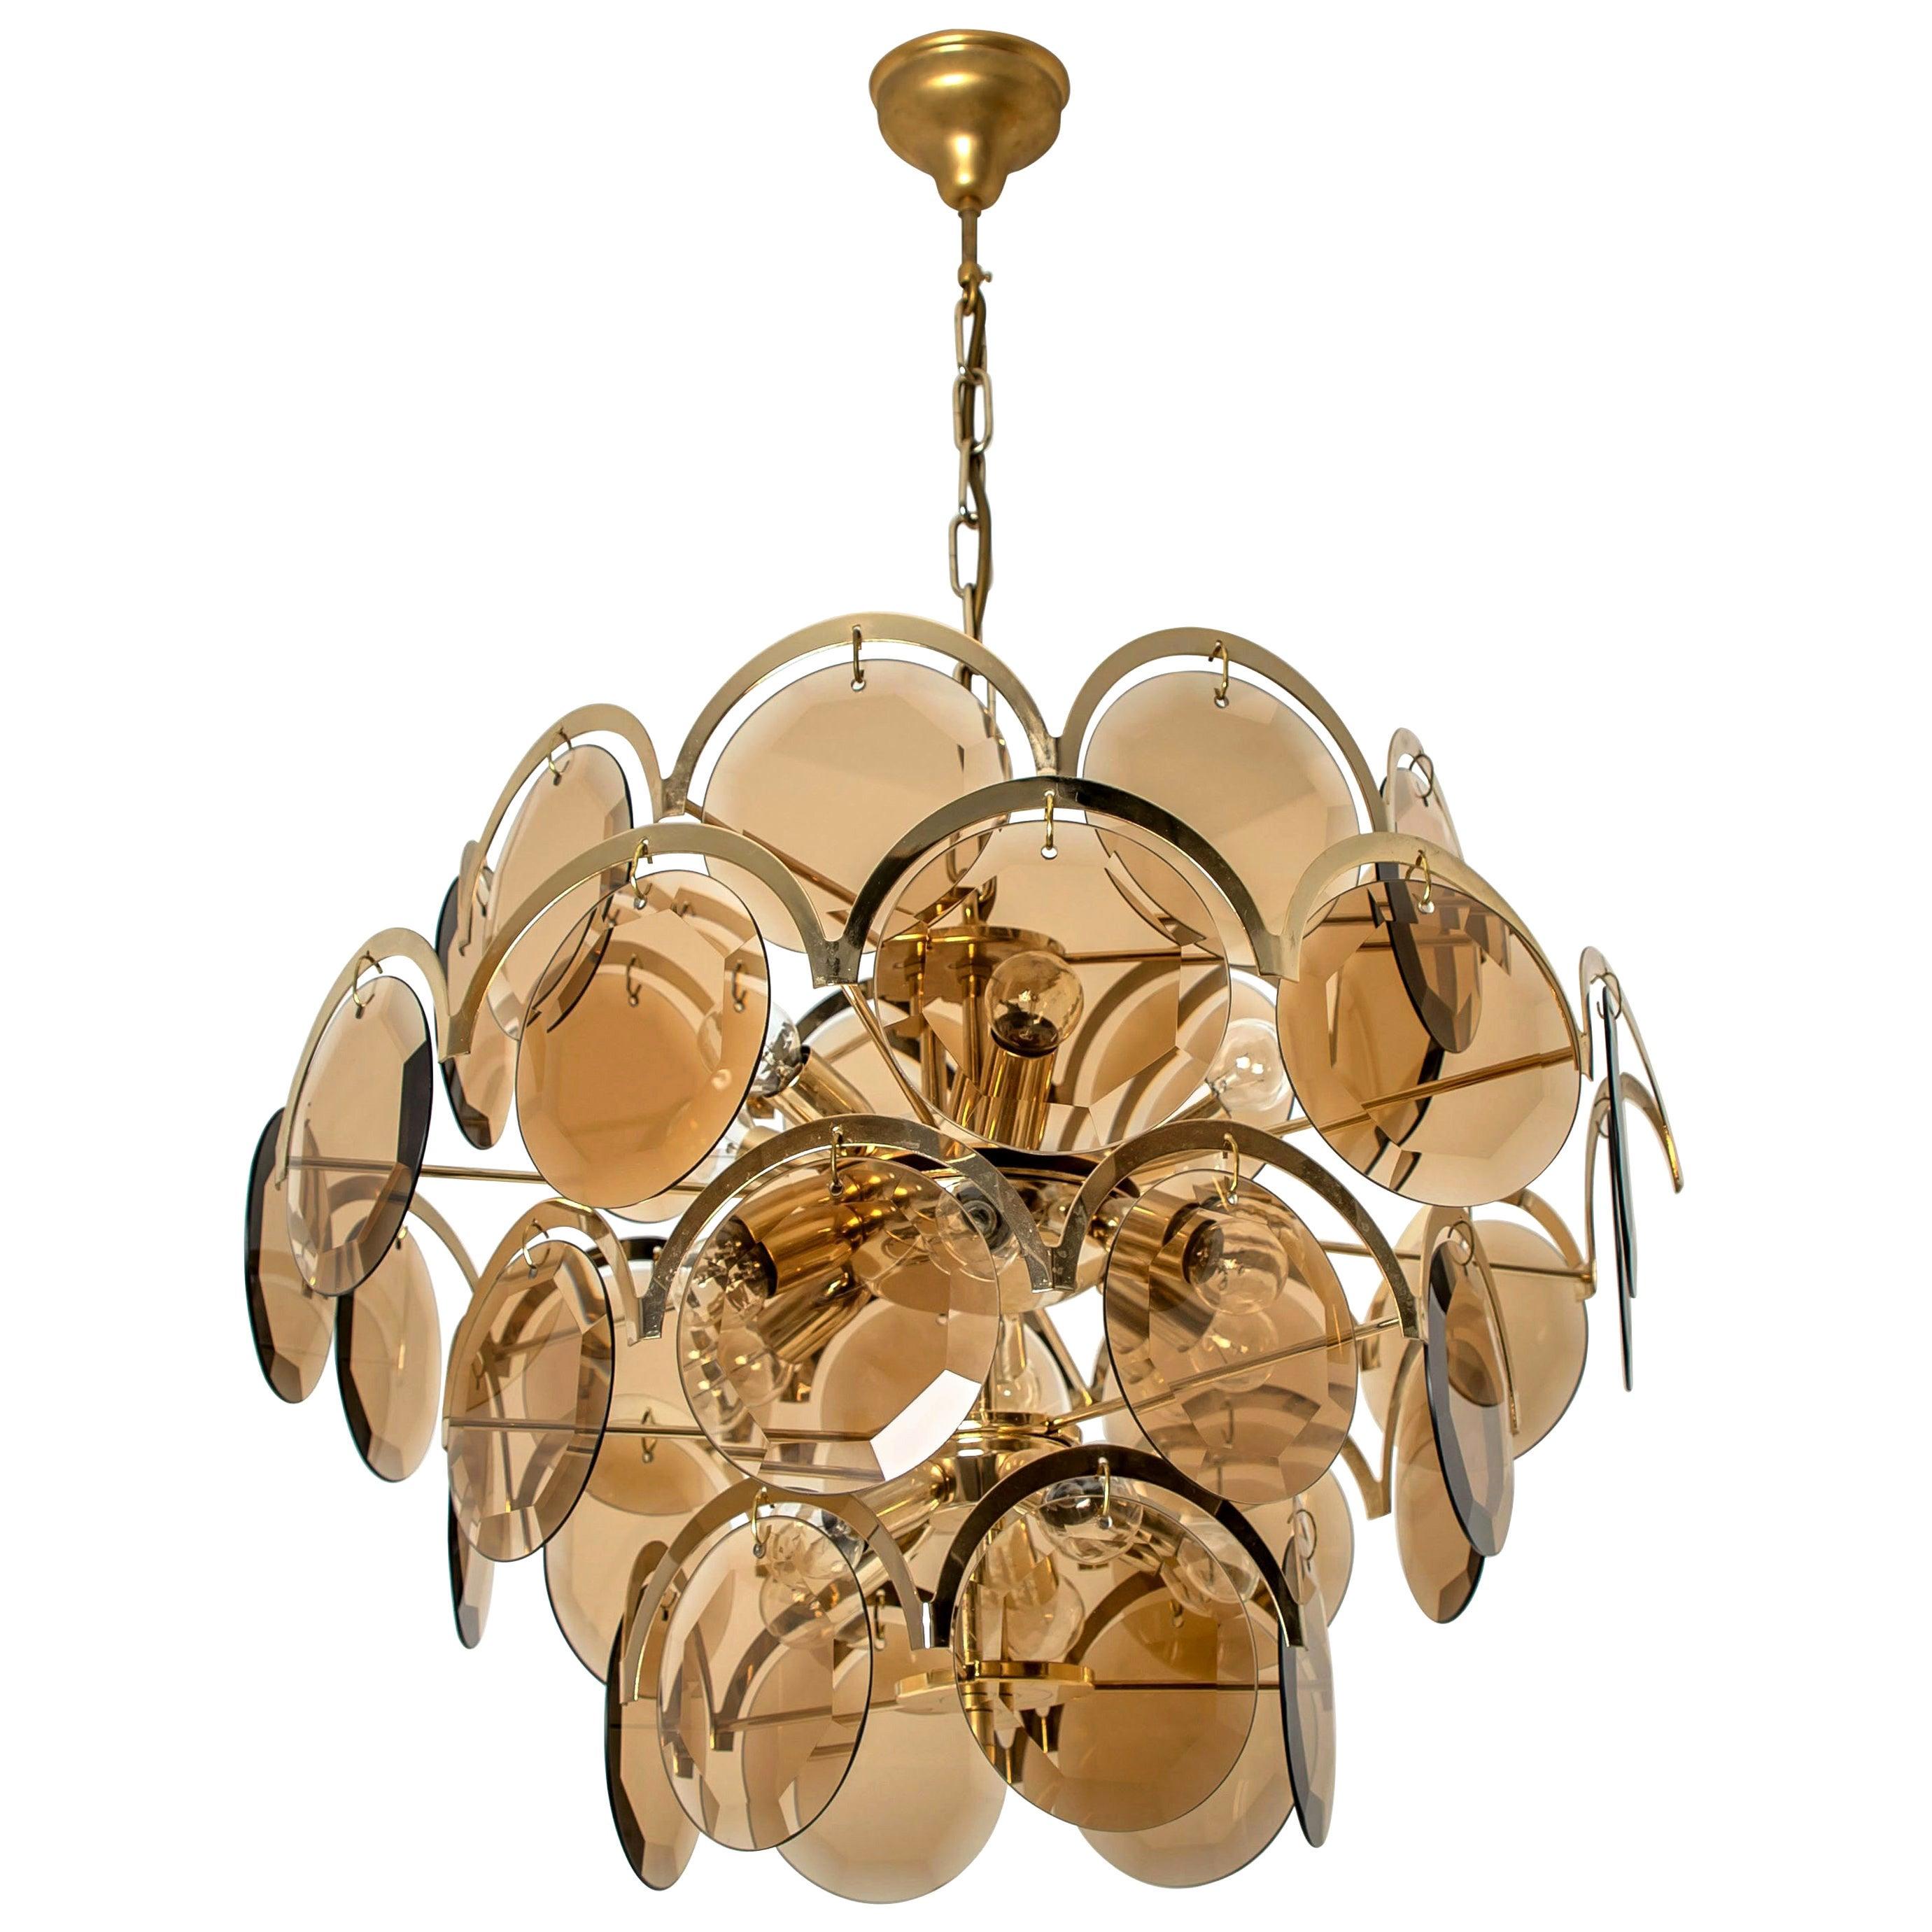 Large Smoked Glass and Brass Chandelier in the Style of Vistosi, Italy